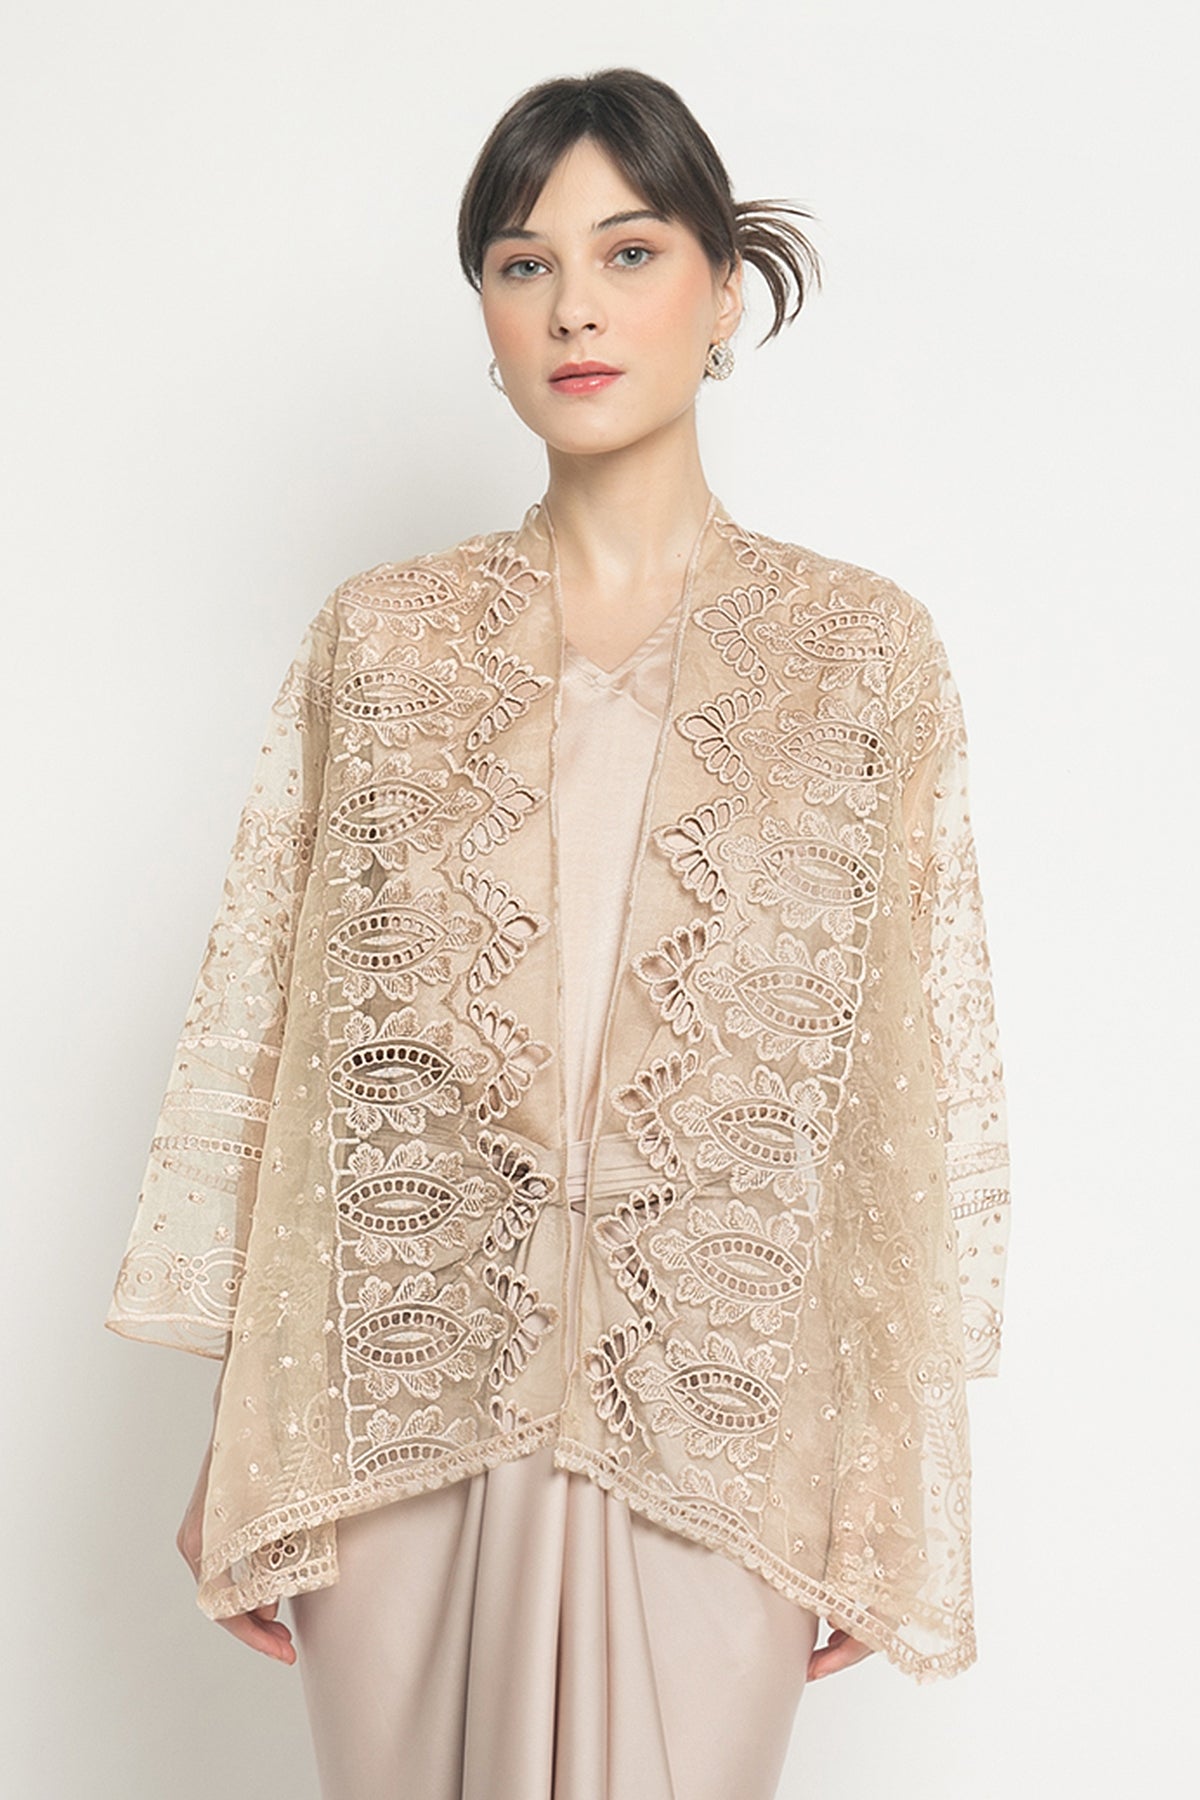 Rosemary Outer in Nude Gold